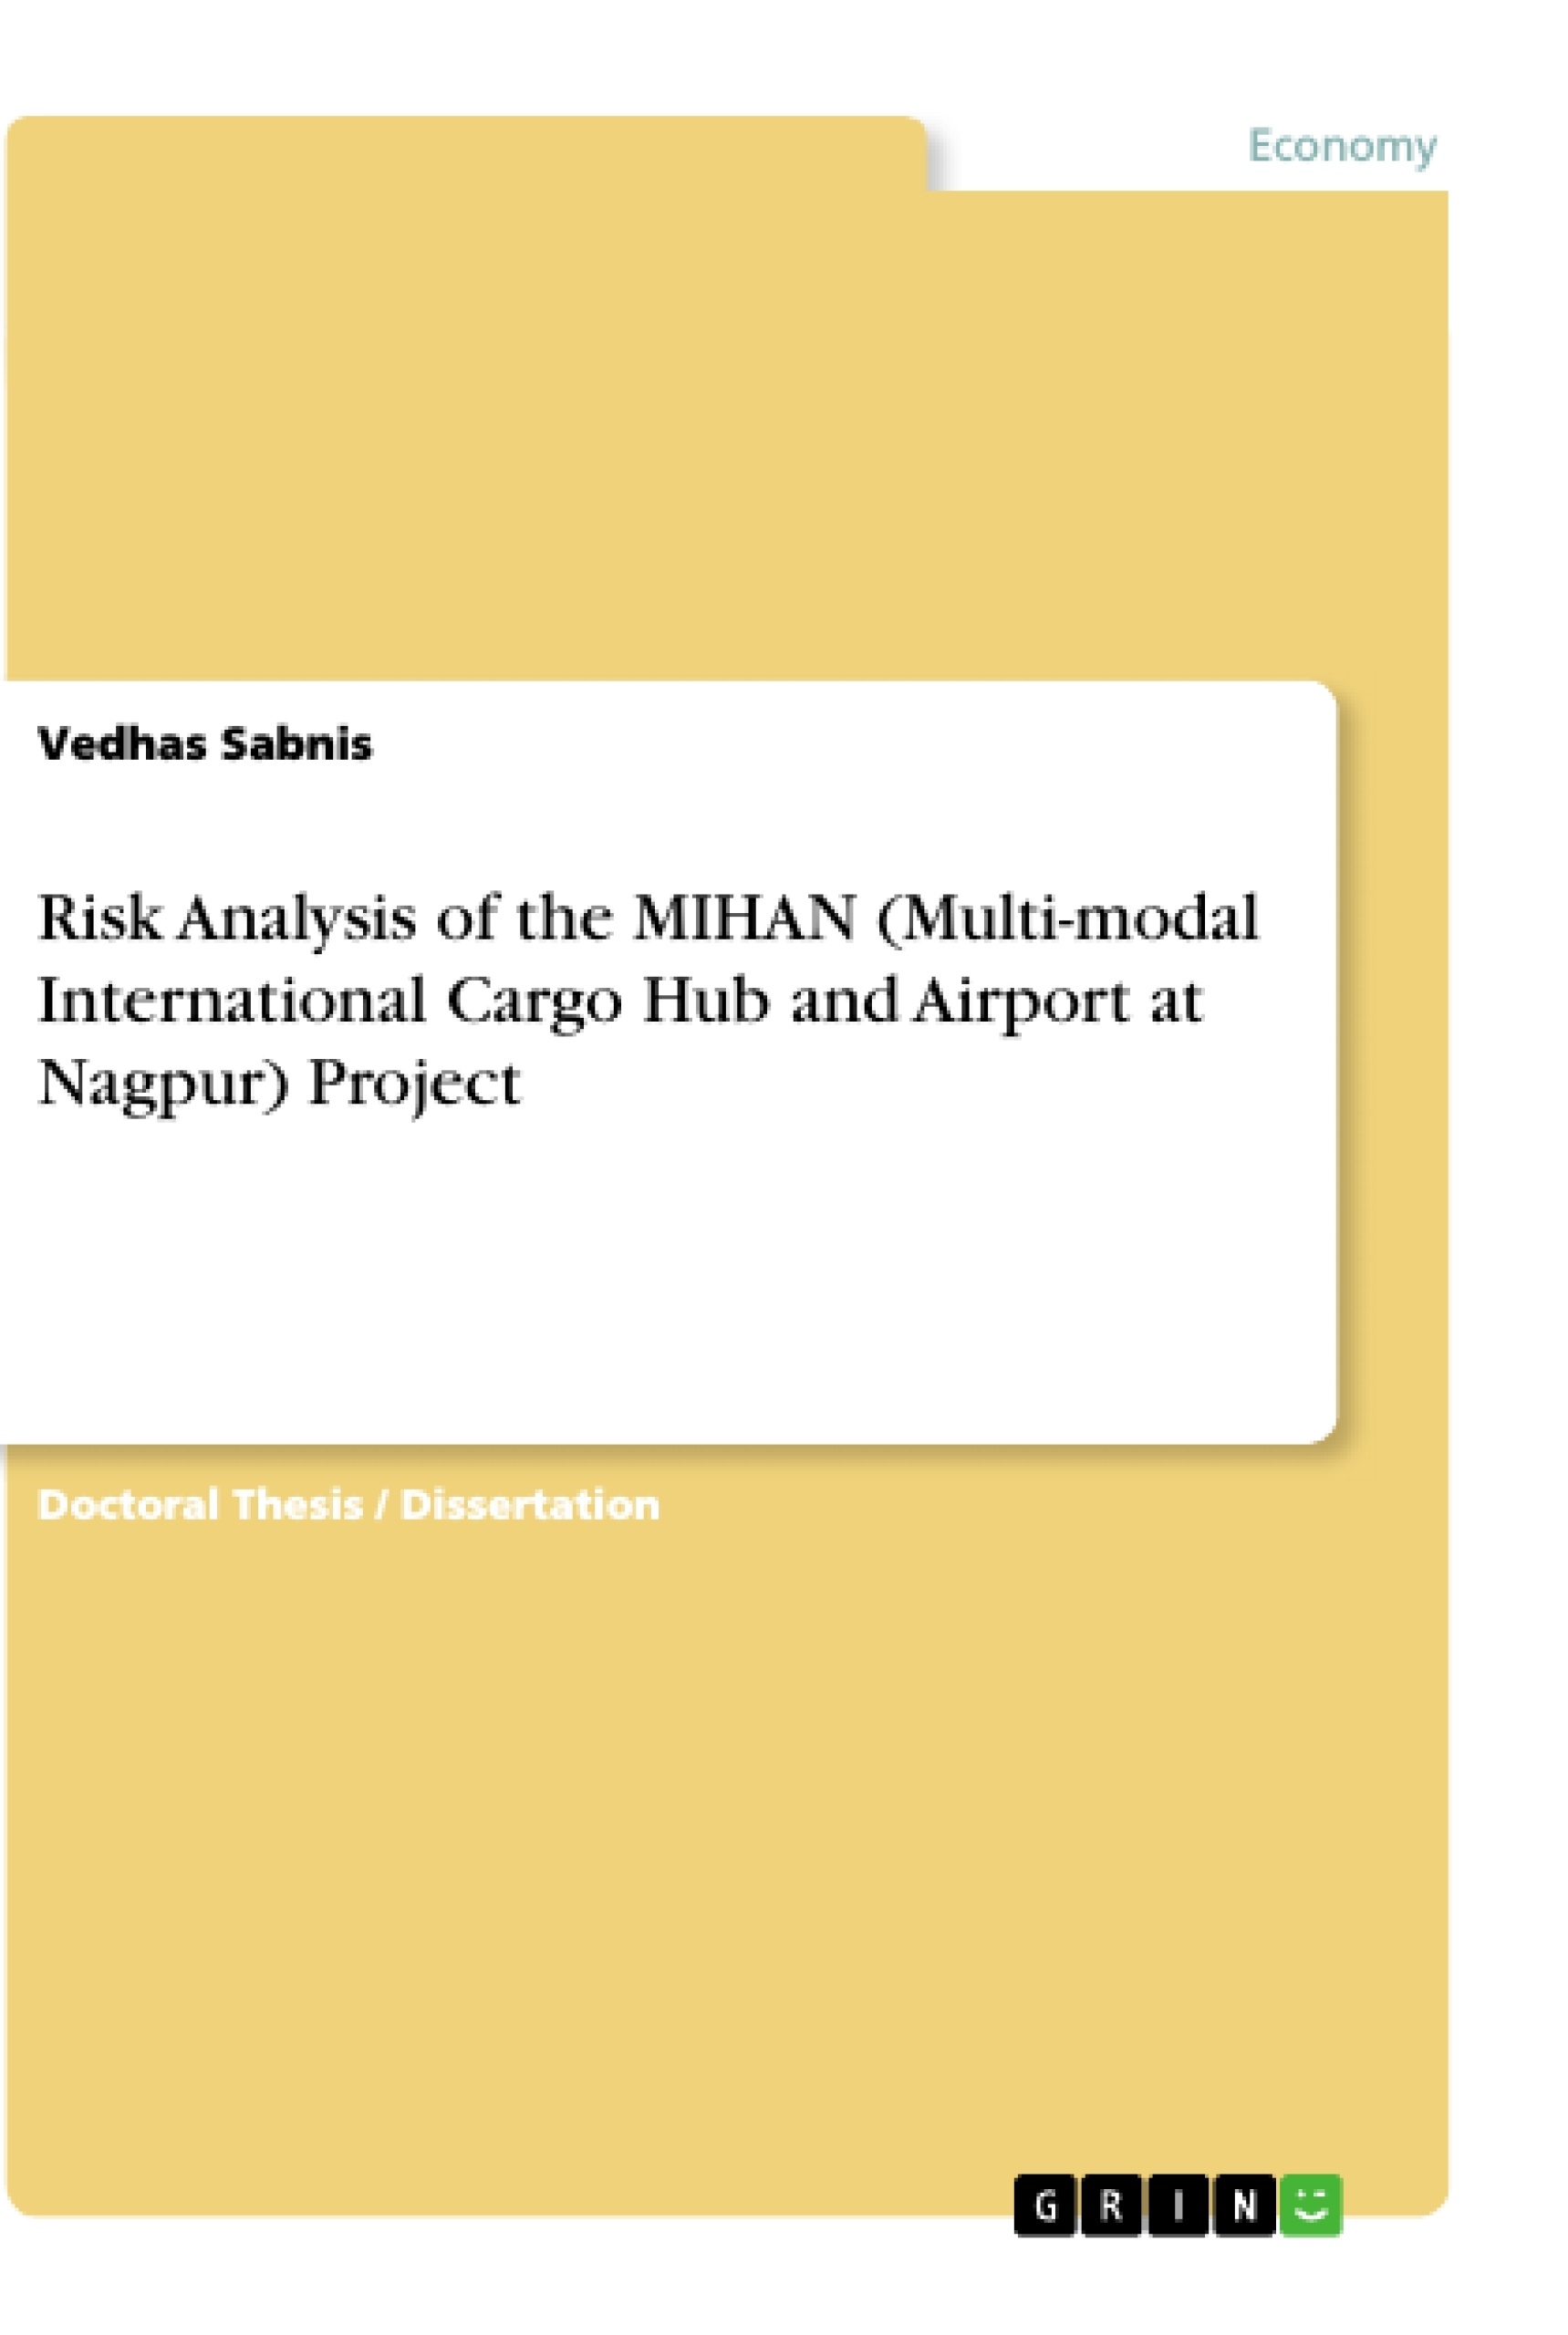 Title: Risk Analysis of the MIHAN (Multi-modal International Cargo Hub and Airport at Nagpur) Project